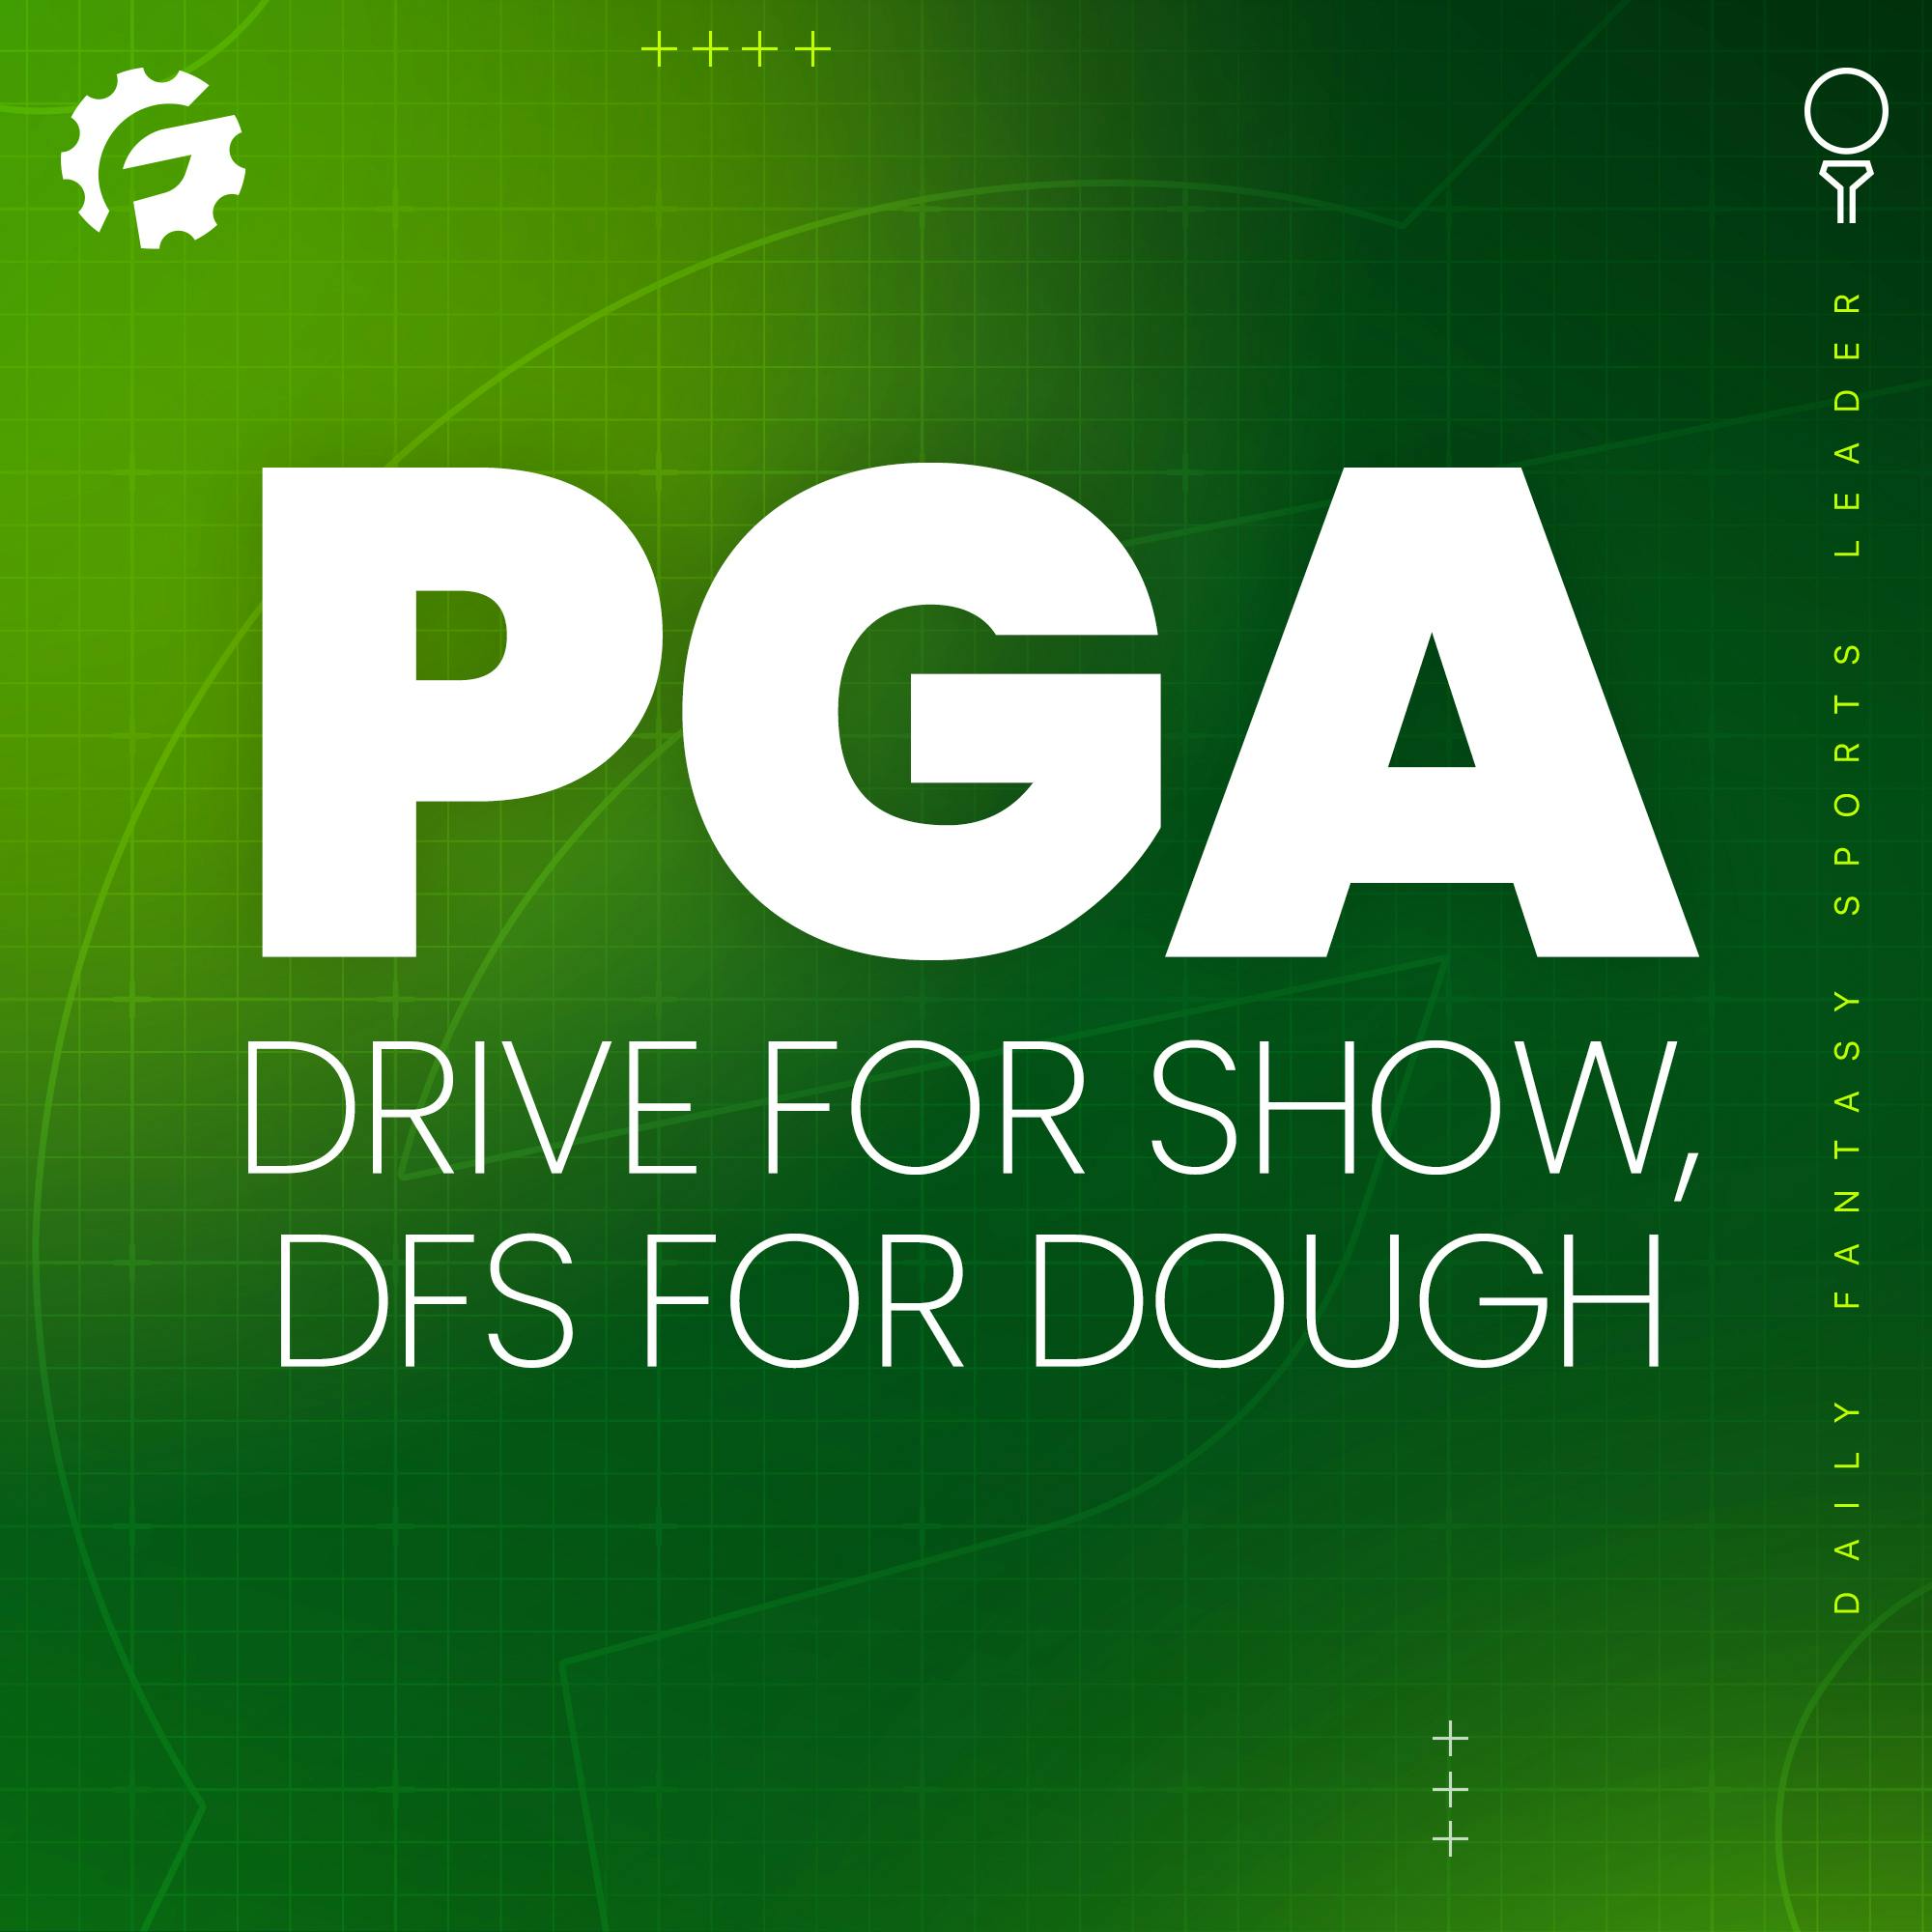 PGA Drive For Show, DFS For Dough: WGC Dell Technologies Match Play